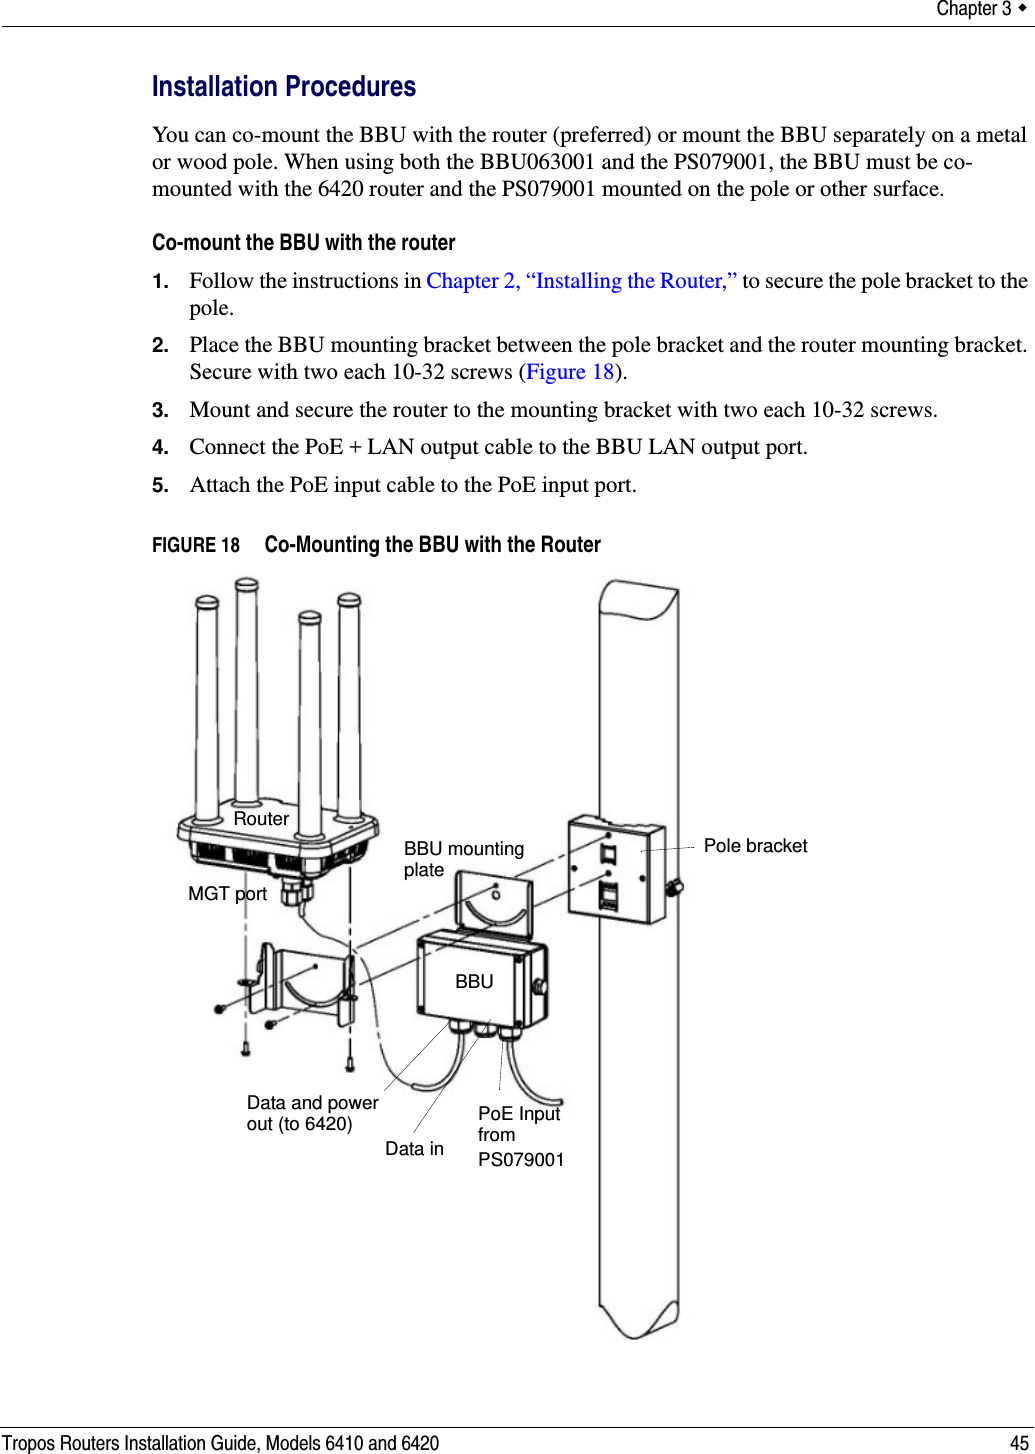 Chapter 3  Tropos Routers Installation Guide, Models 6410 and 6420 45Installation ProceduresYou can co-mount the BBU with the router (preferred) or mount the BBU separately on a metal or wood pole. When using both the BBU063001 and the PS079001, the BBU must be co-mounted with the 6420 router and the PS079001 mounted on the pole or other surface.Co-mount the BBU with the router1. Follow the instructions in Chapter 2, “Installing the Router,” to secure the pole bracket to the pole.2. Place the BBU mounting bracket between the pole bracket and the router mounting bracket. Secure with two each 10-32 screws (Figure 18).3. Mount and secure the router to the mounting bracket with two each 10-32 screws.4. Connect the PoE + LAN output cable to the BBU LAN output port.5. Attach the PoE input cable to the PoE input port.FIGURE 18   Co-Mounting the BBU with the RouterBBU mountingPoE InputMGT portRouterplateBBUfrom PS079001Data and powerData inout (to 6420)Pole bracket